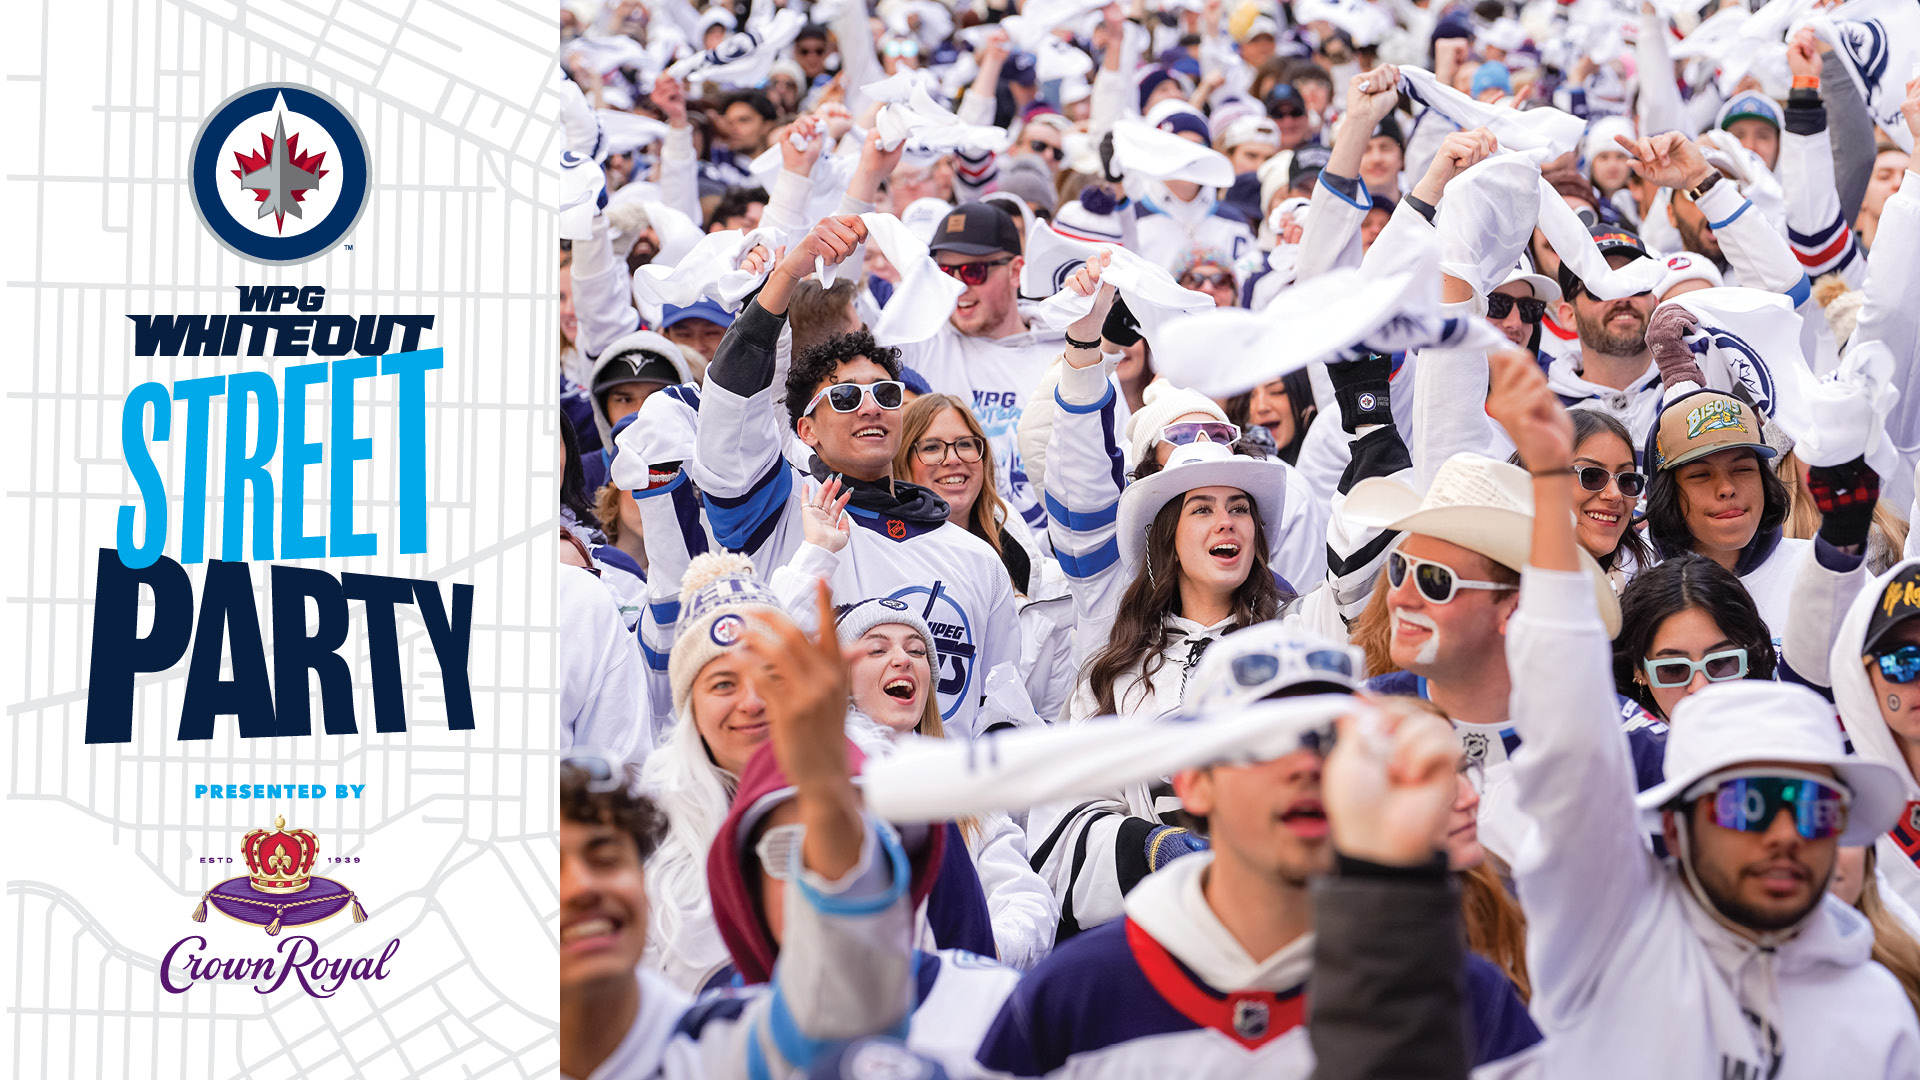 Score some downtown game-day specials and get in on the Whiteout action!